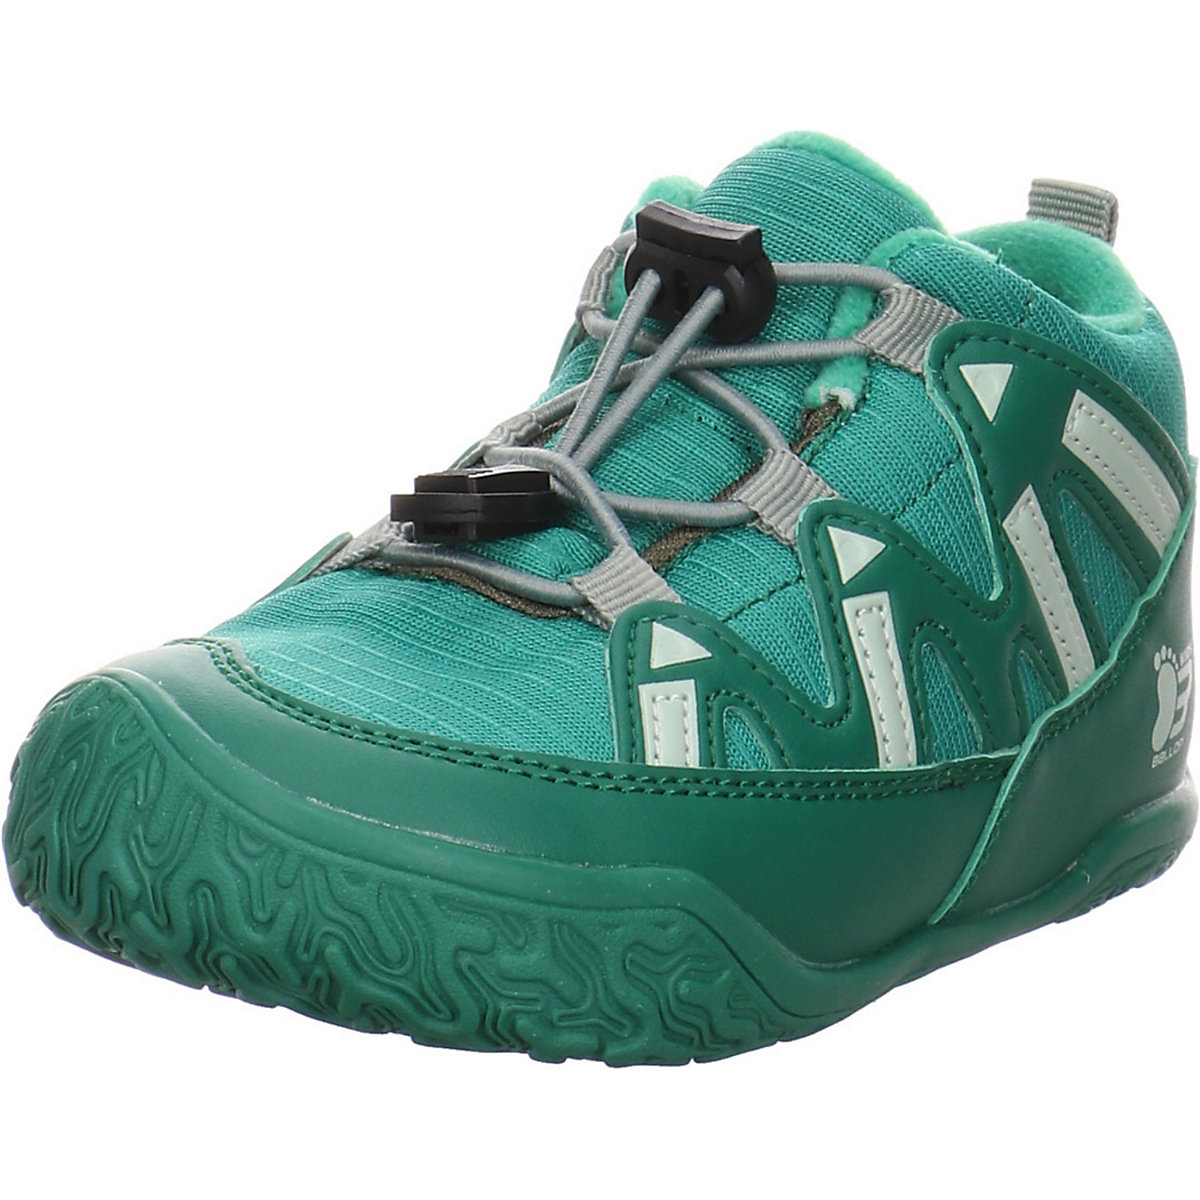 Ballop Kinder High Sneakers